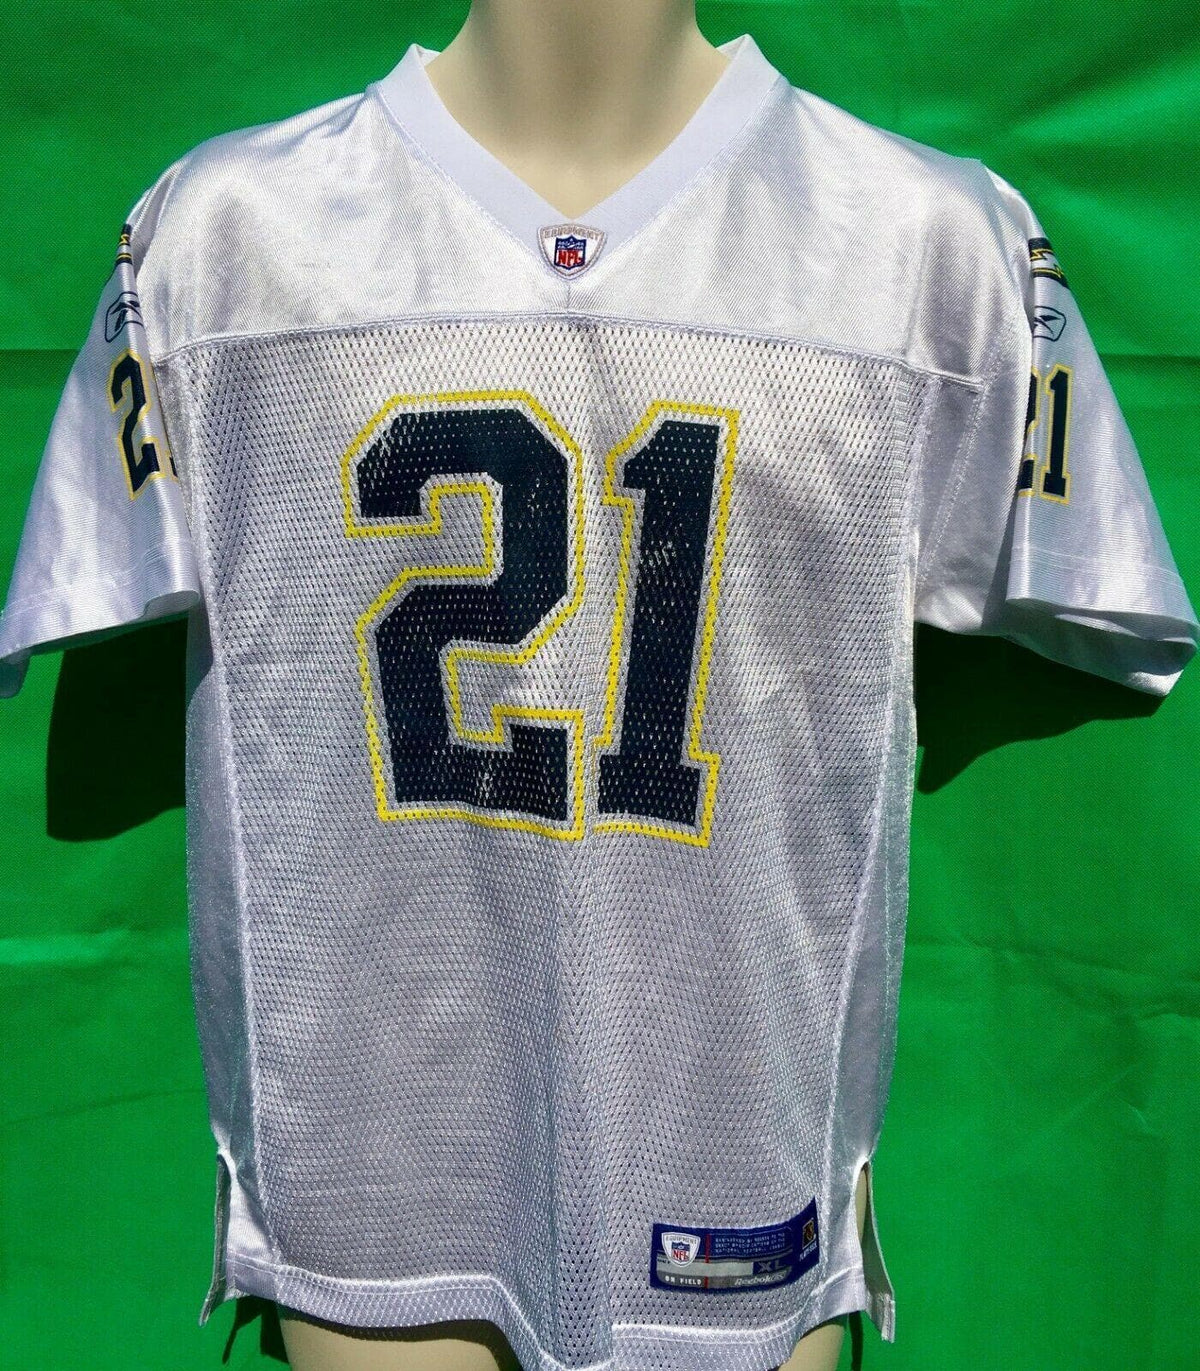 NFL Los Angeles Chargers Ladainian Tomlinson #21 Reebok Jersey Youth X-Large 18-20